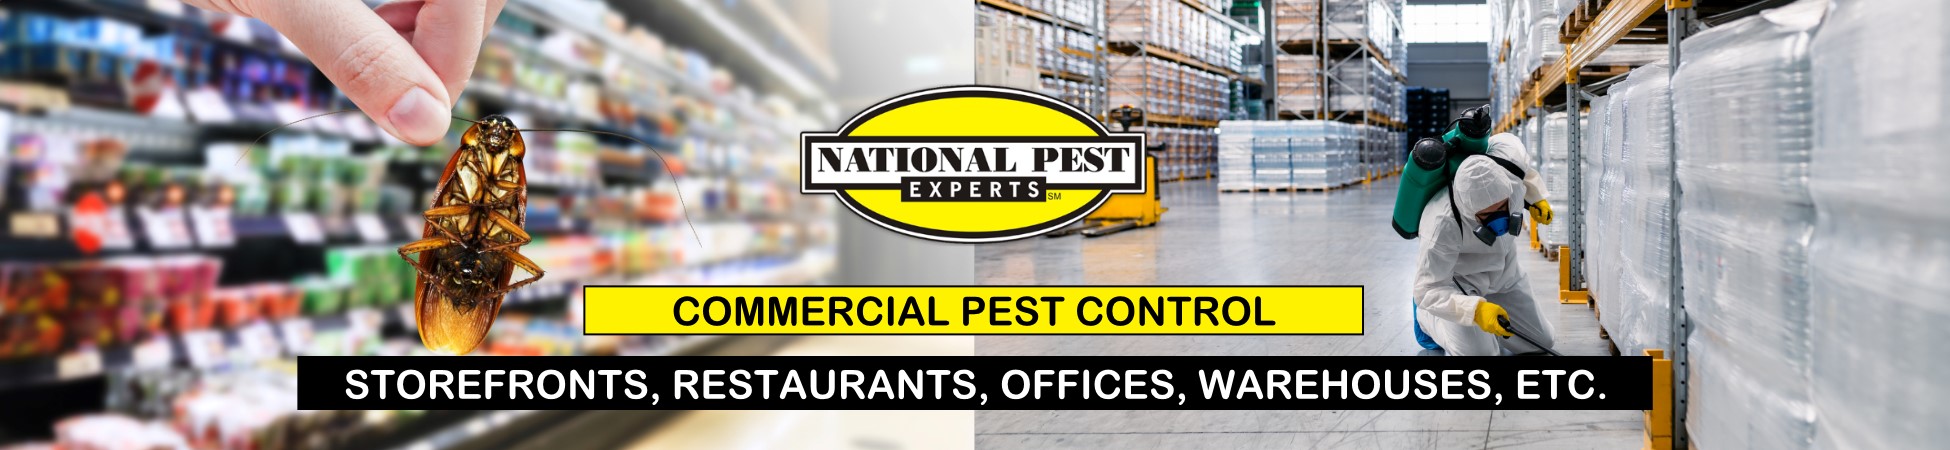 National Pest Experts - Commercial & Industrial exterminating and pest control in Dix Hills, NY